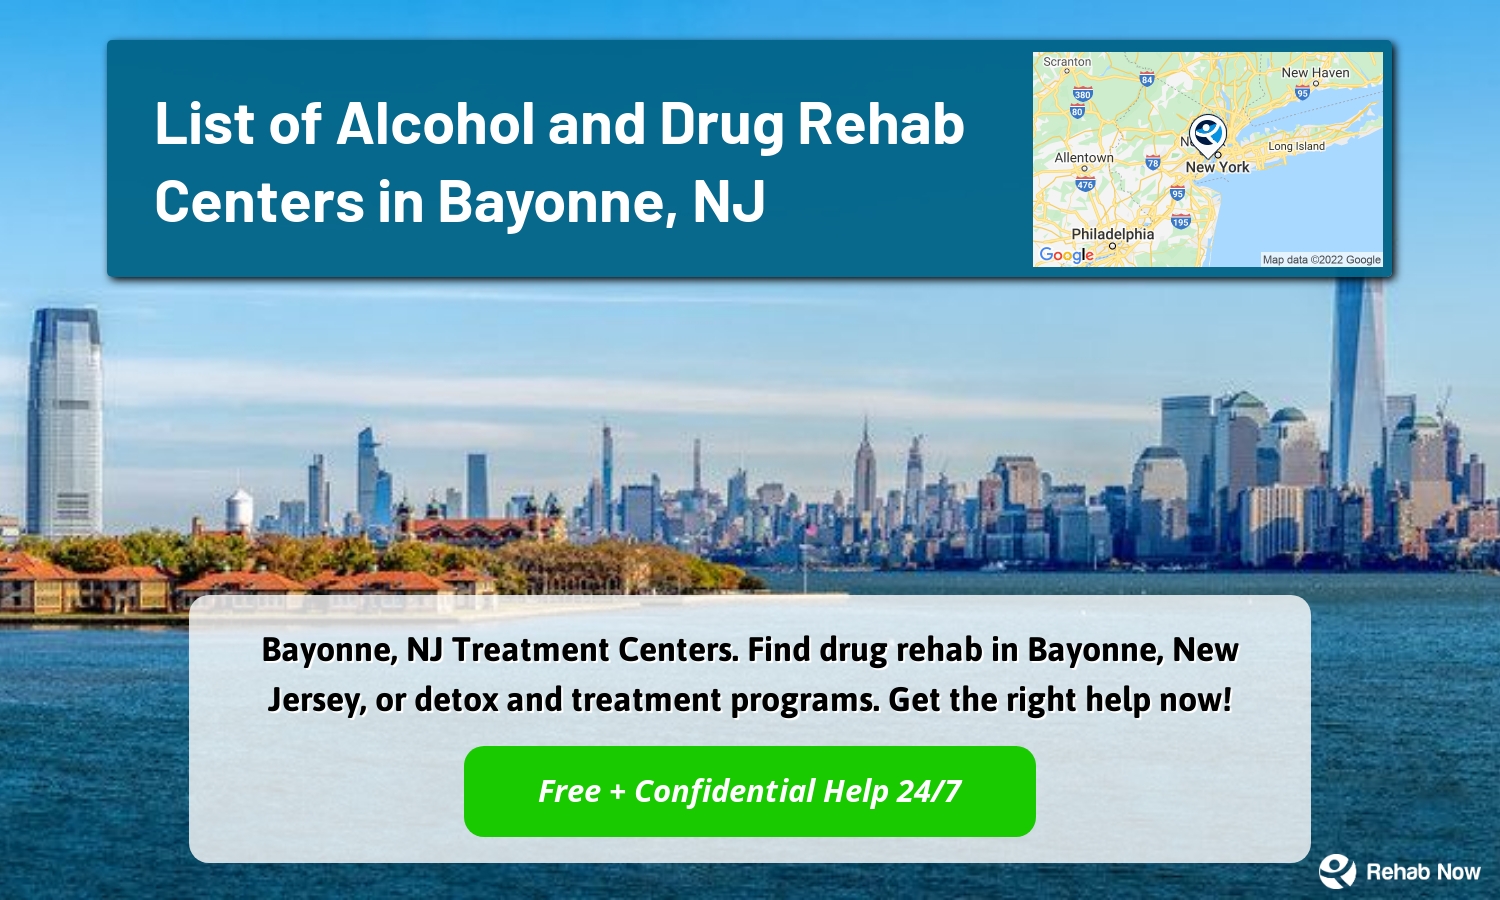 Bayonne, NJ Treatment Centers. Find drug rehab in Bayonne, New Jersey, or detox and treatment programs. Get the right help now!